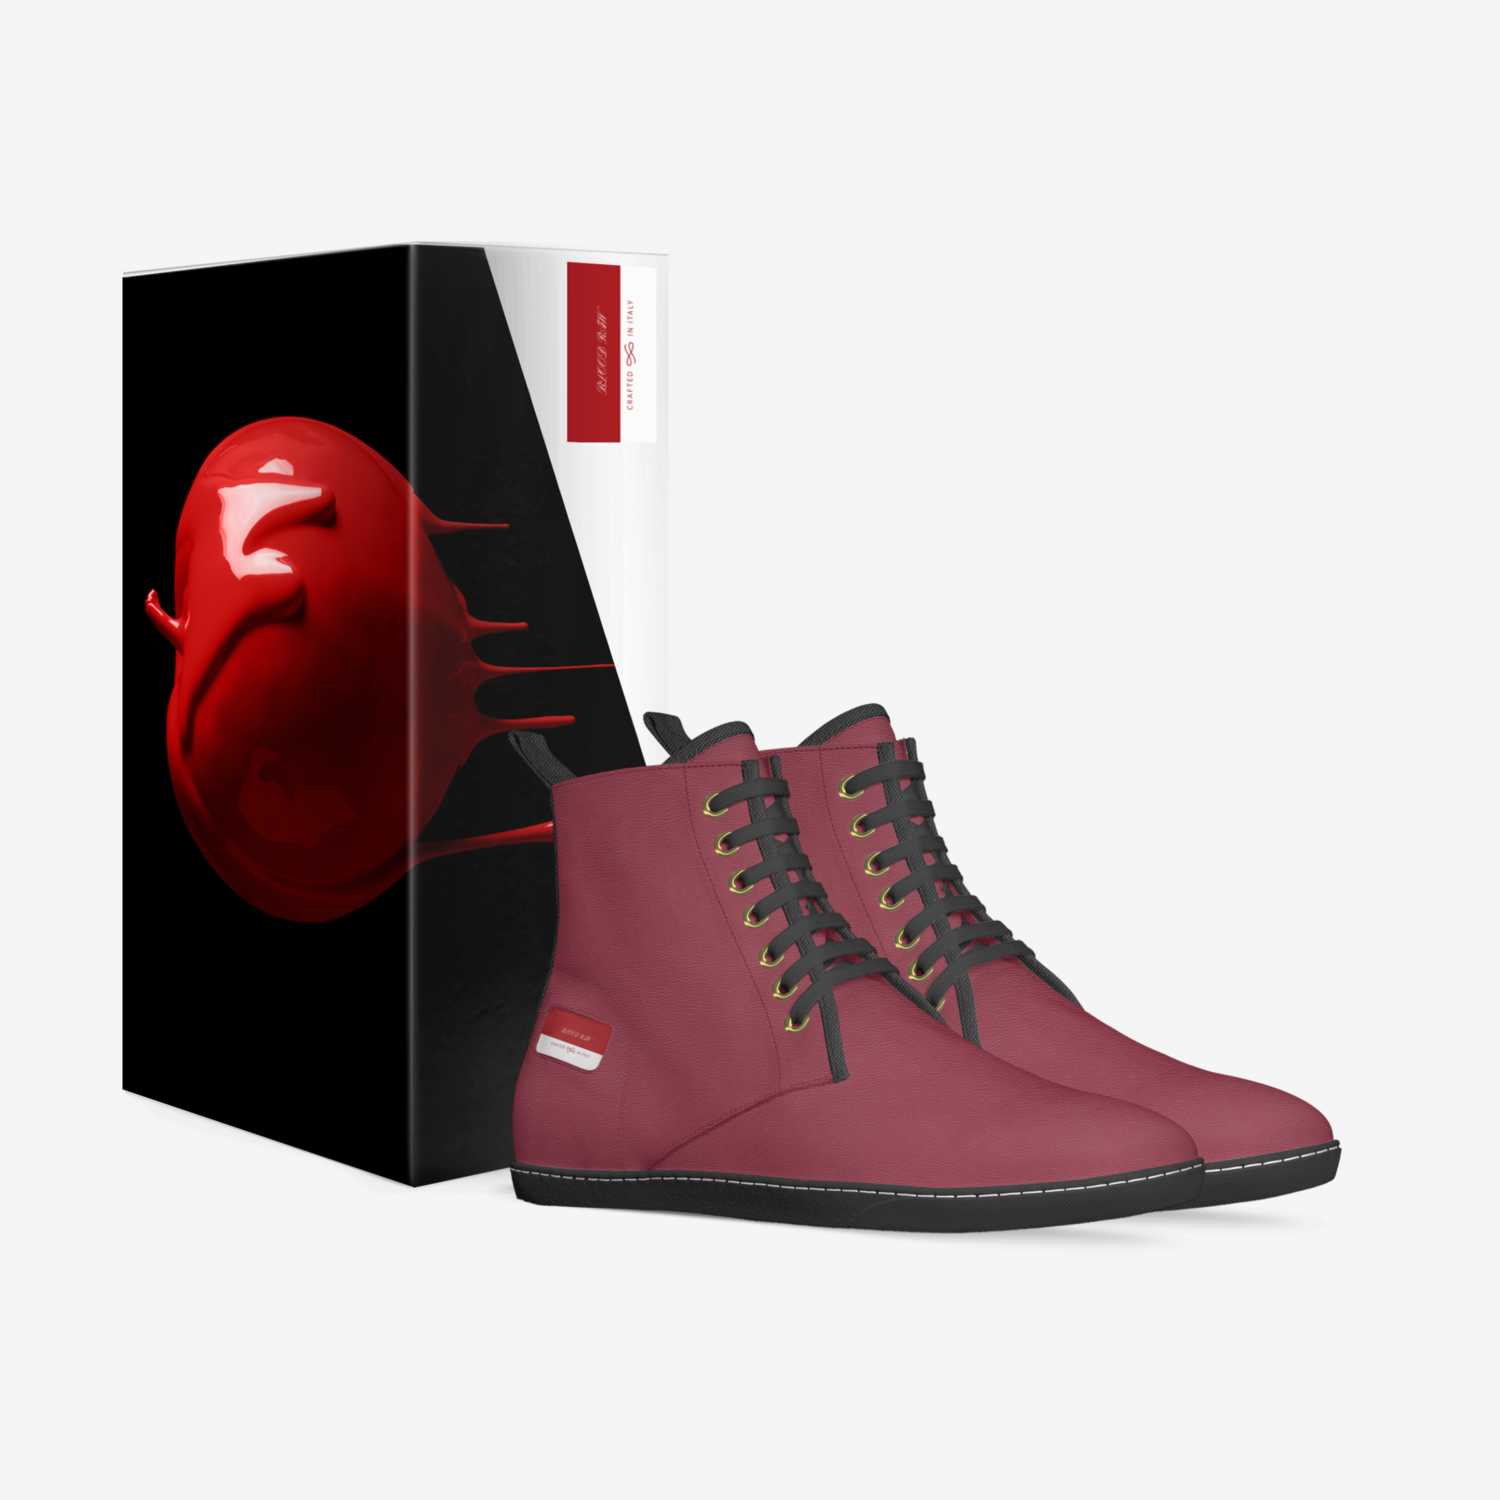 BLOOD RAW custom made in Italy shoes by Jerrell Ragland | Box view